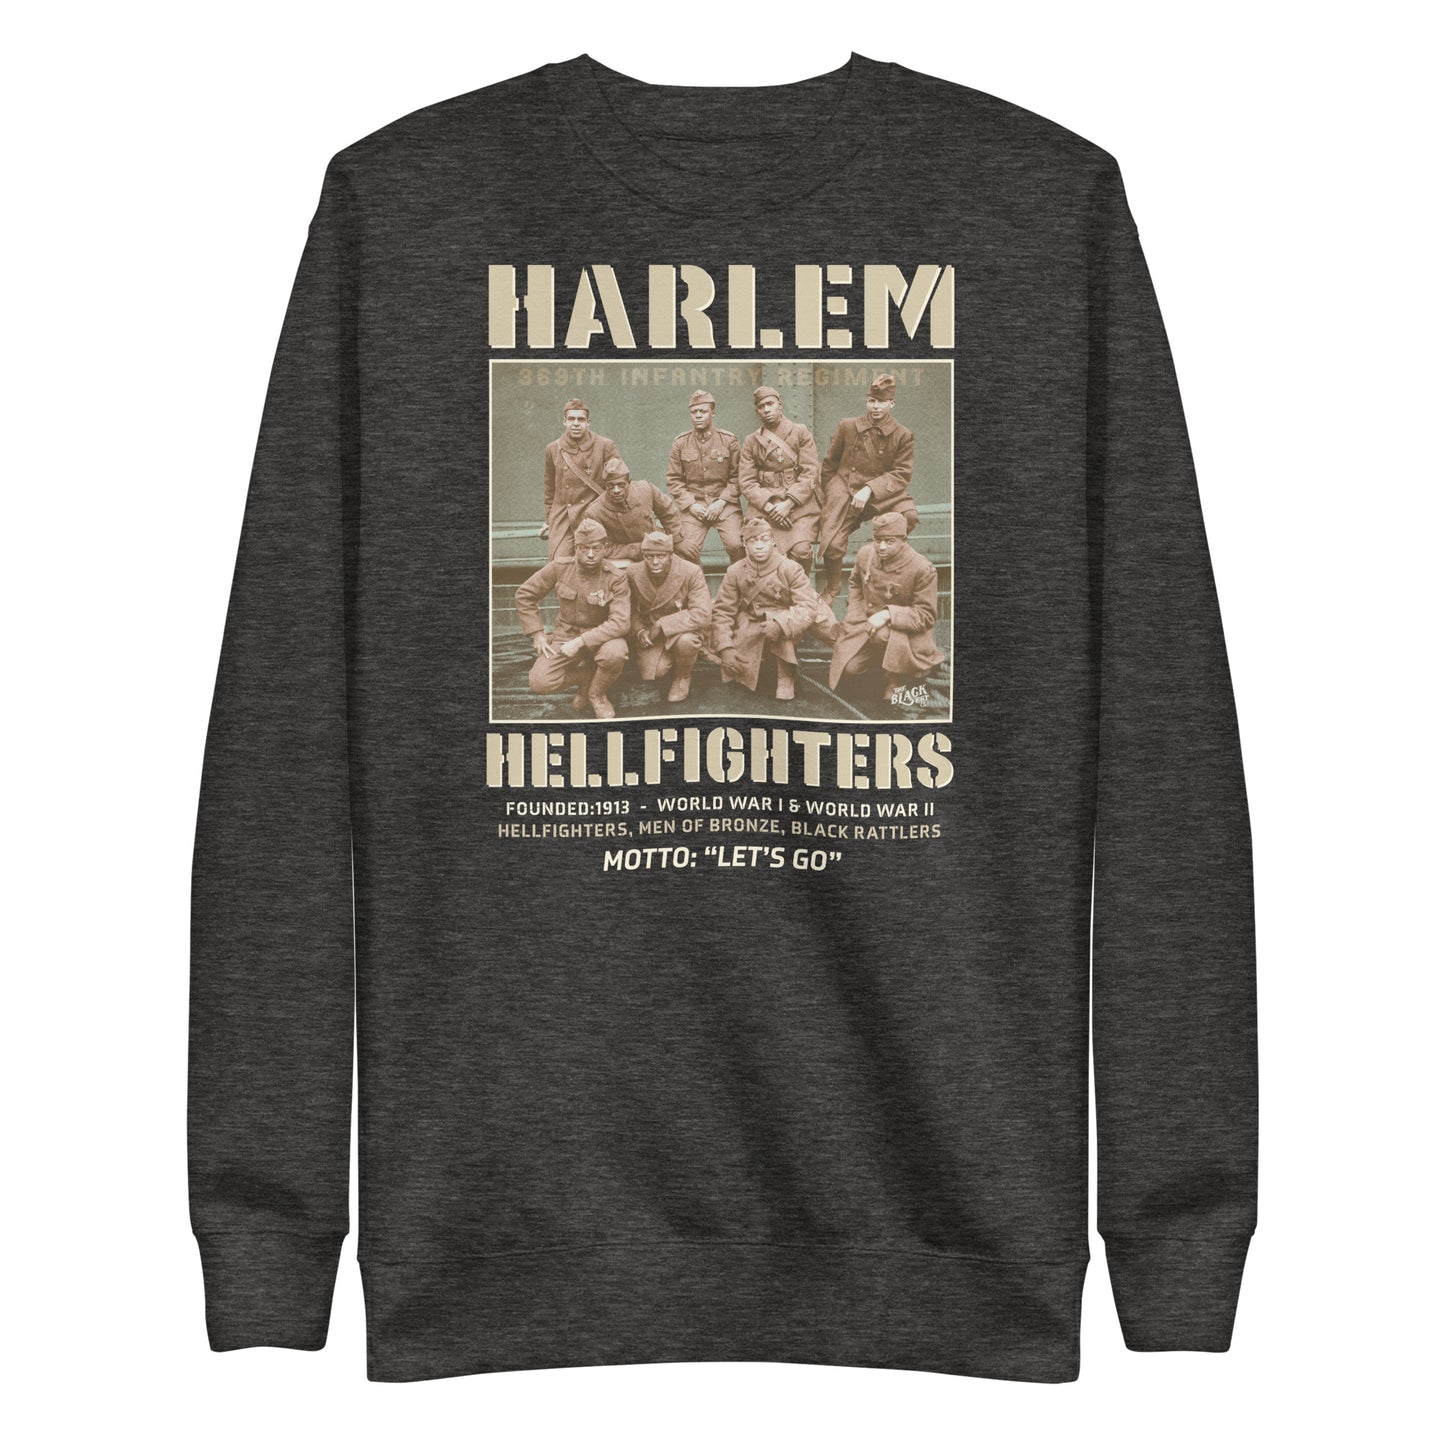 dark grey premium sweatshirt with a vintage image of wwi soldiers with text that reads harlem hellfighters